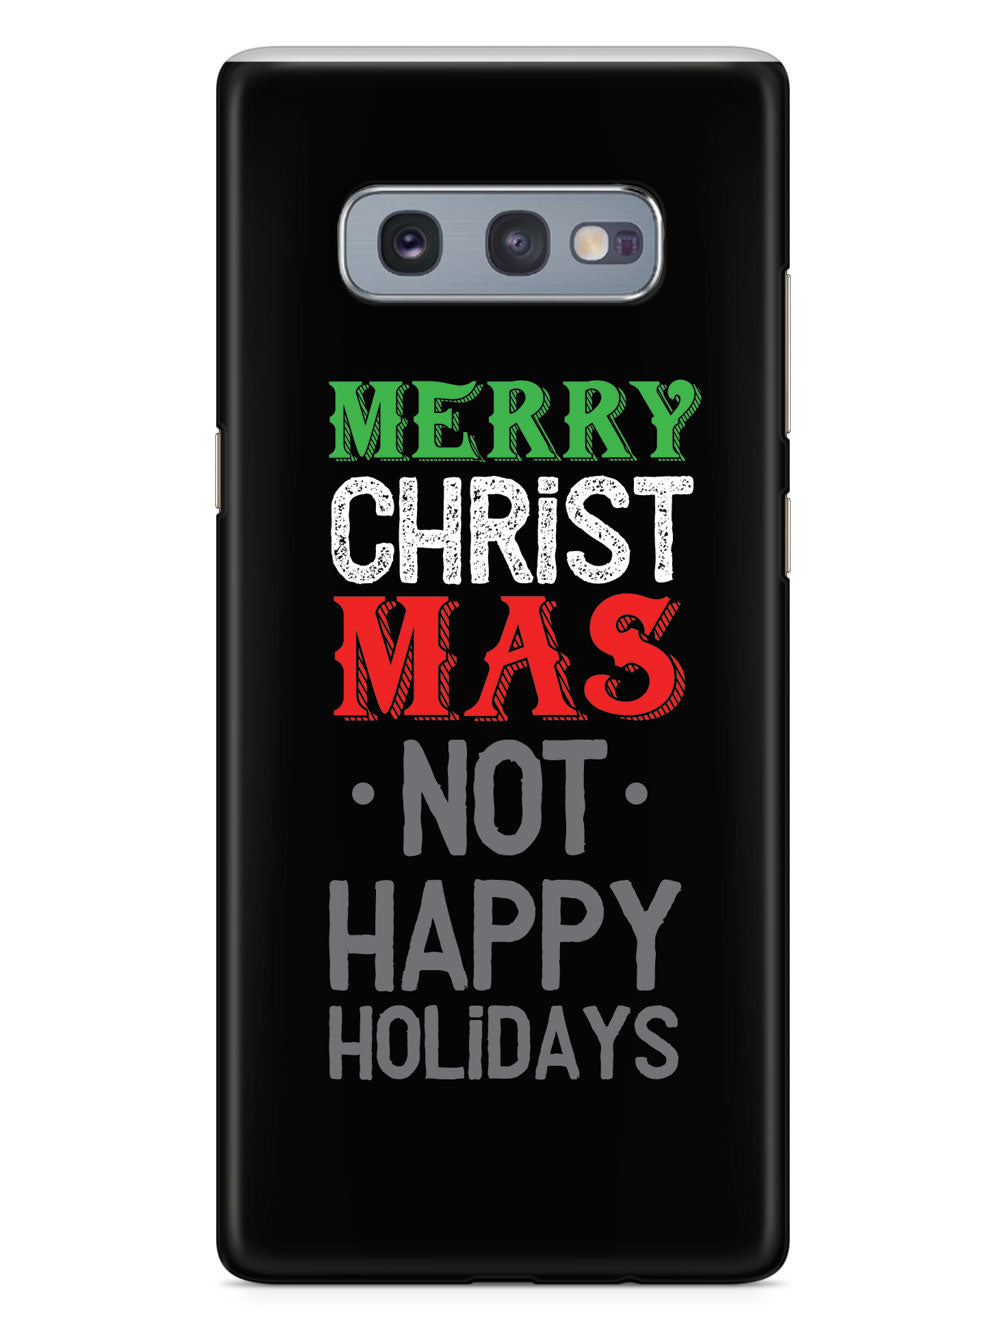 It's Merry Christmas not Happy Holidays Case